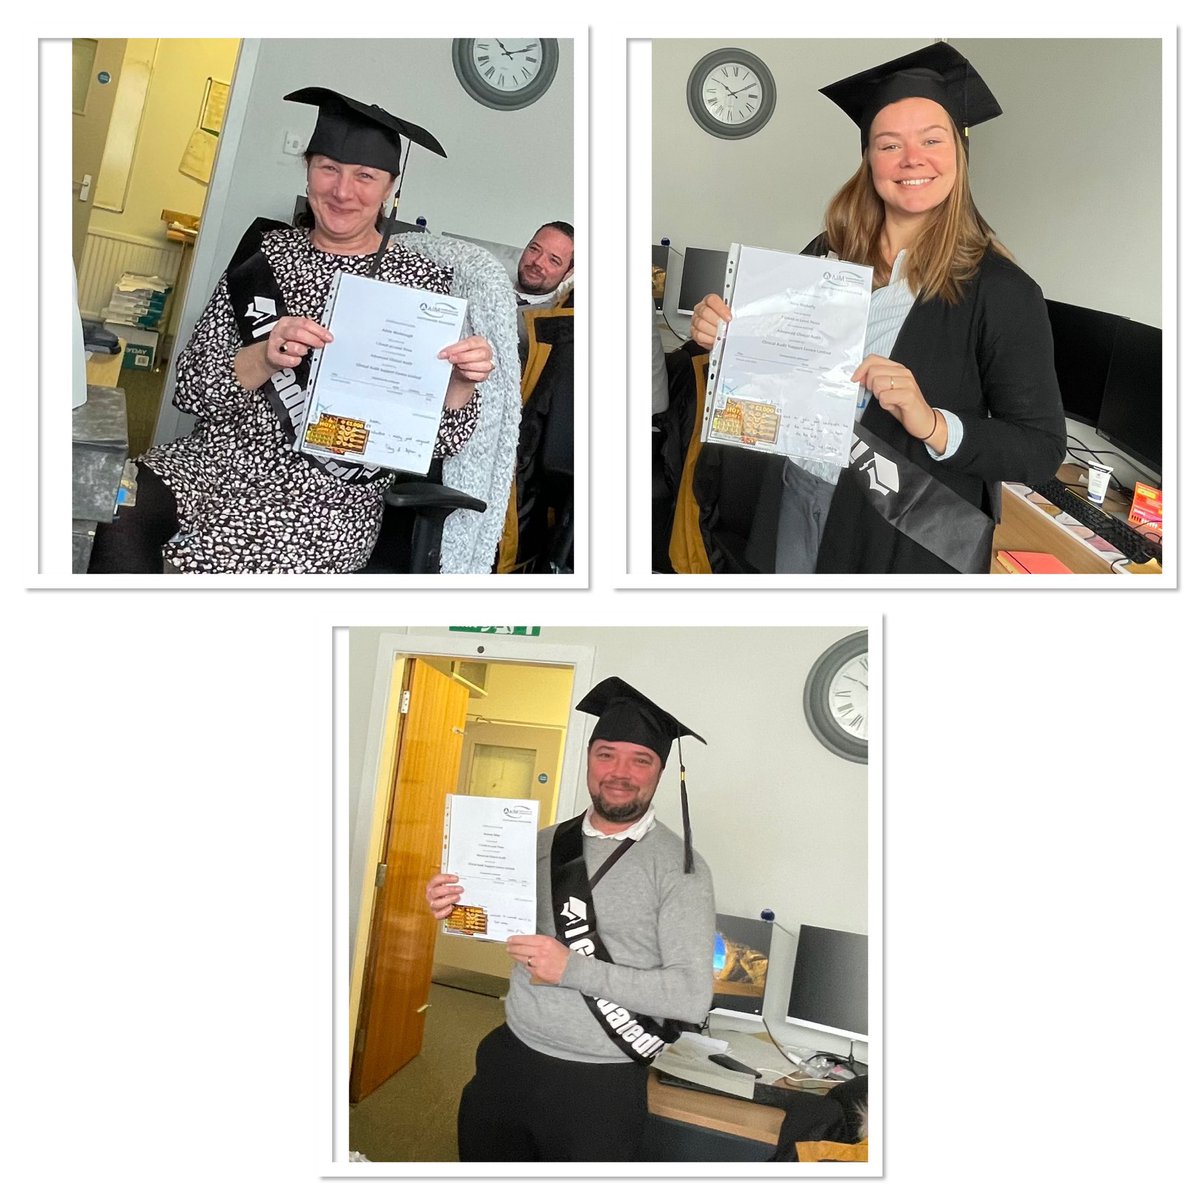 Graduation Day in the #clinicalaudit dept @WWLNHS 
Congrats to all the team on passing their Clinical Audit assignments following fab training by @cascleicester @TrackedbyAMaT ❤️